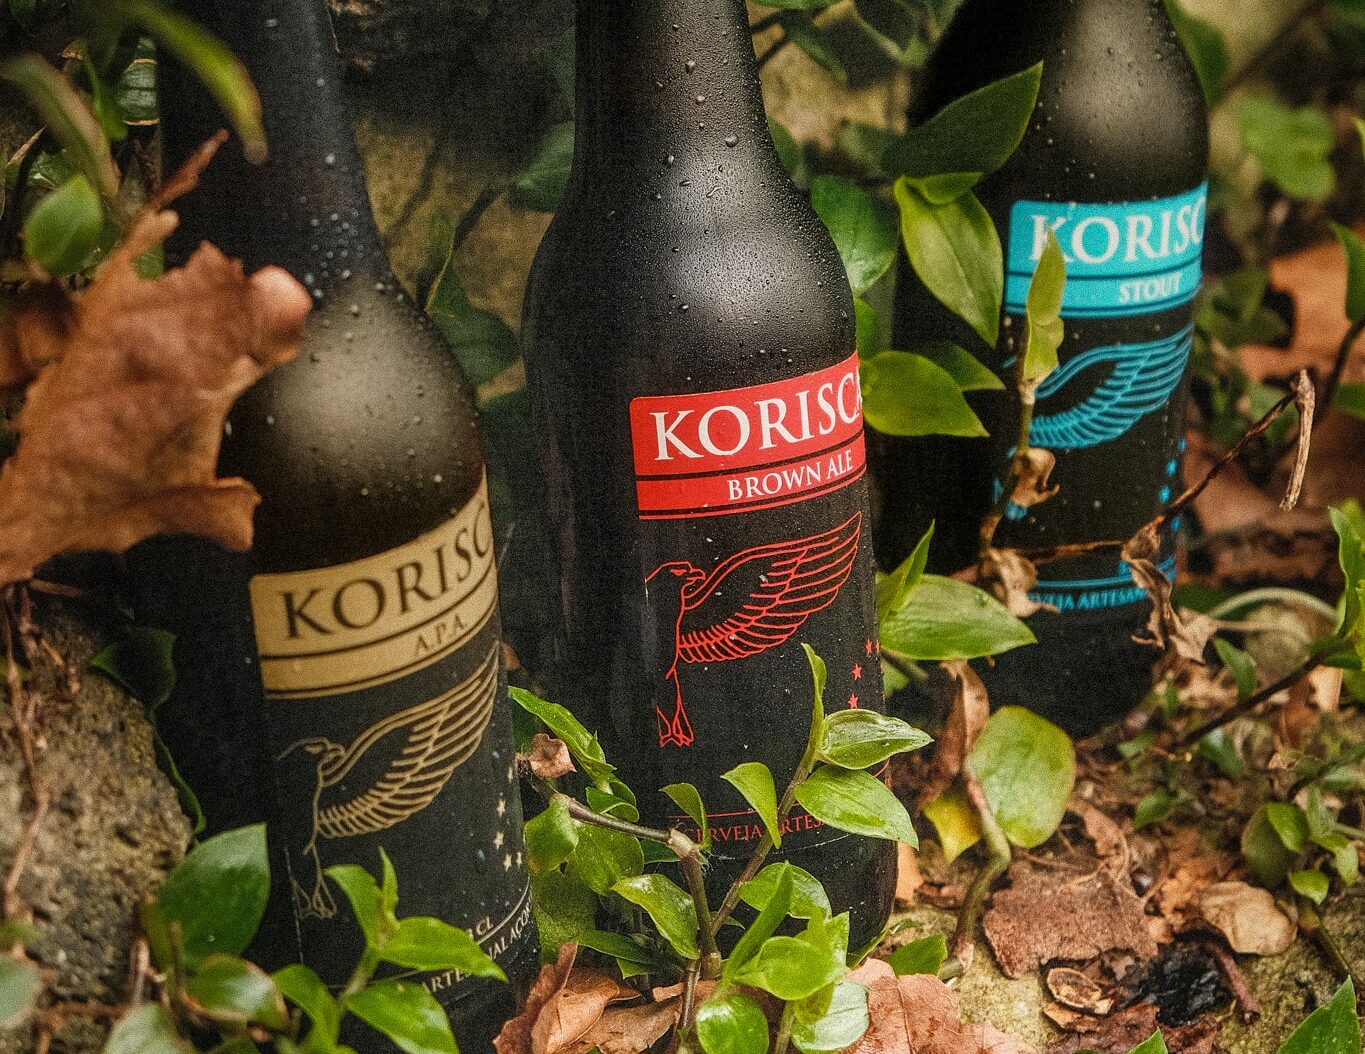 Azorean craft beer Korisca Clássica II (APA), Korisca Clássica I (Brown Ale) and Korisca Clássica III (Stout), in green vegetation and brown leaves, island of São Miguel, Azores.